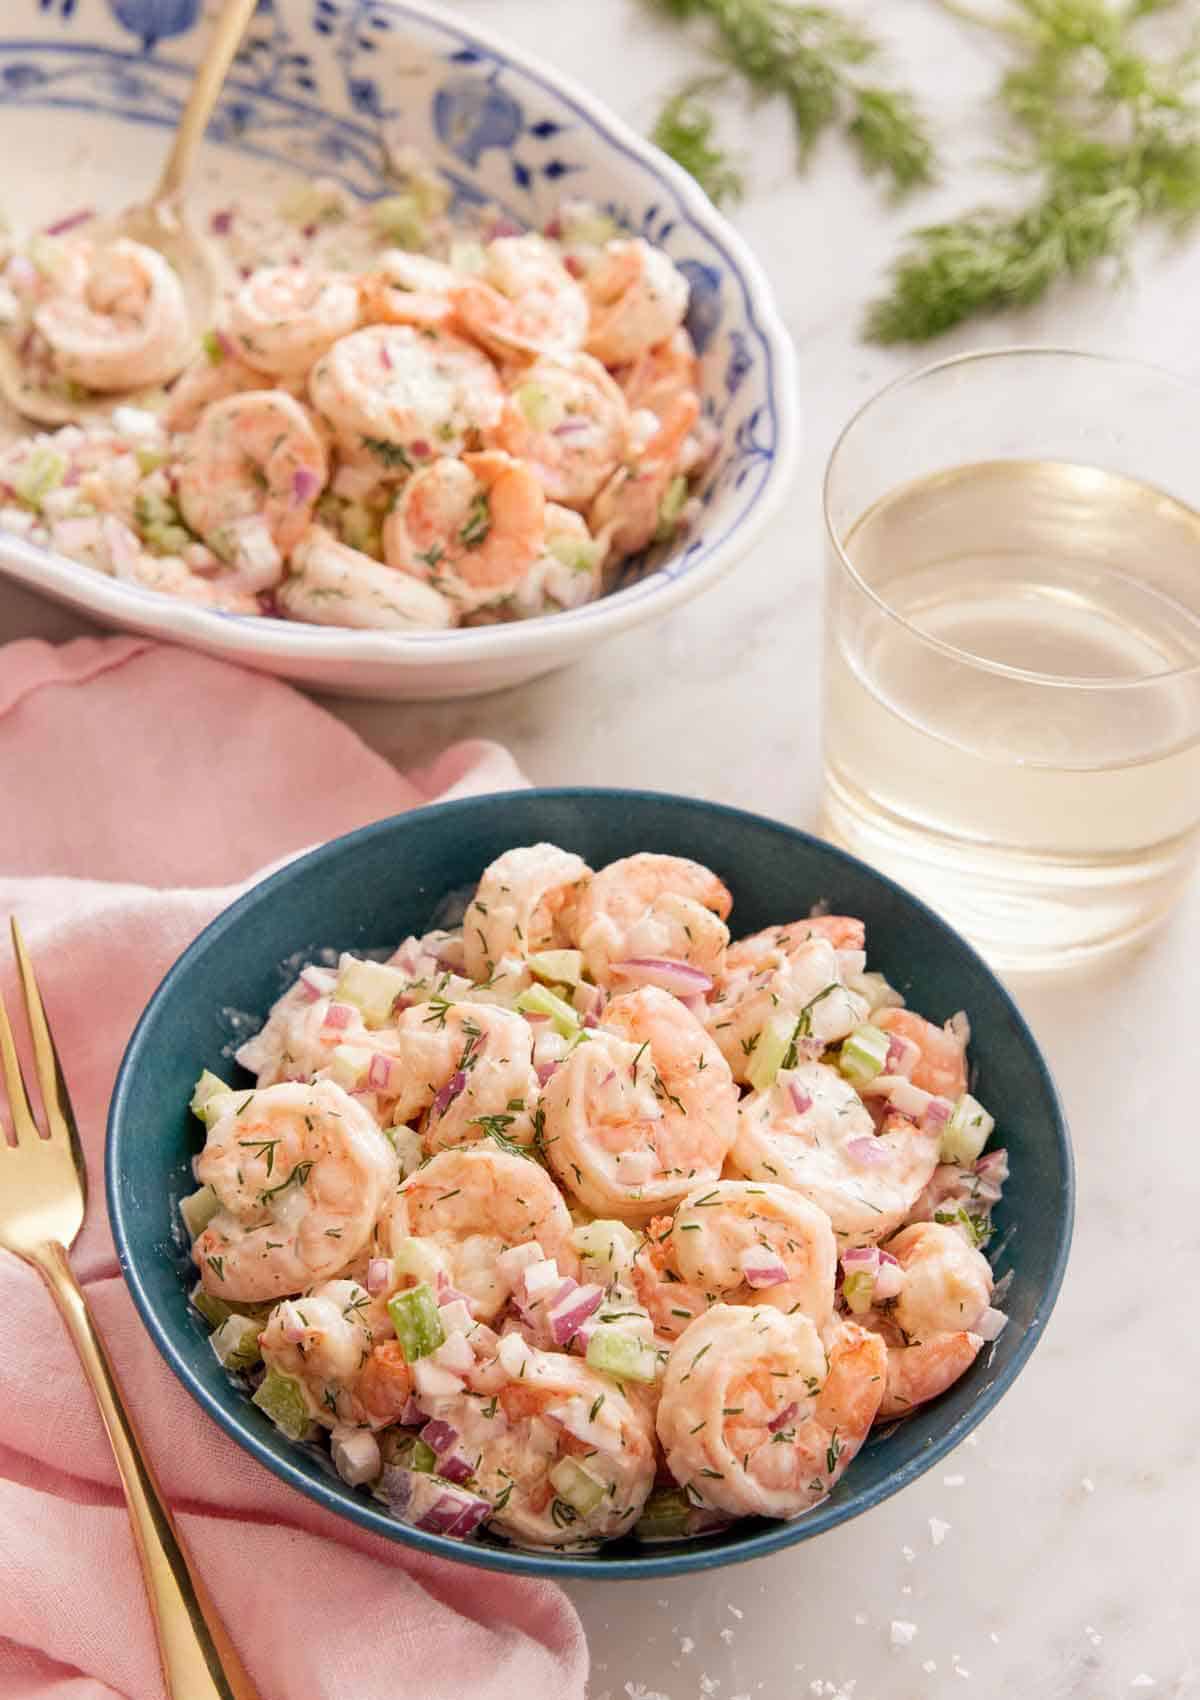 A bowl of shrimp salad with a glass of wine and platter of more shrimp in the background.